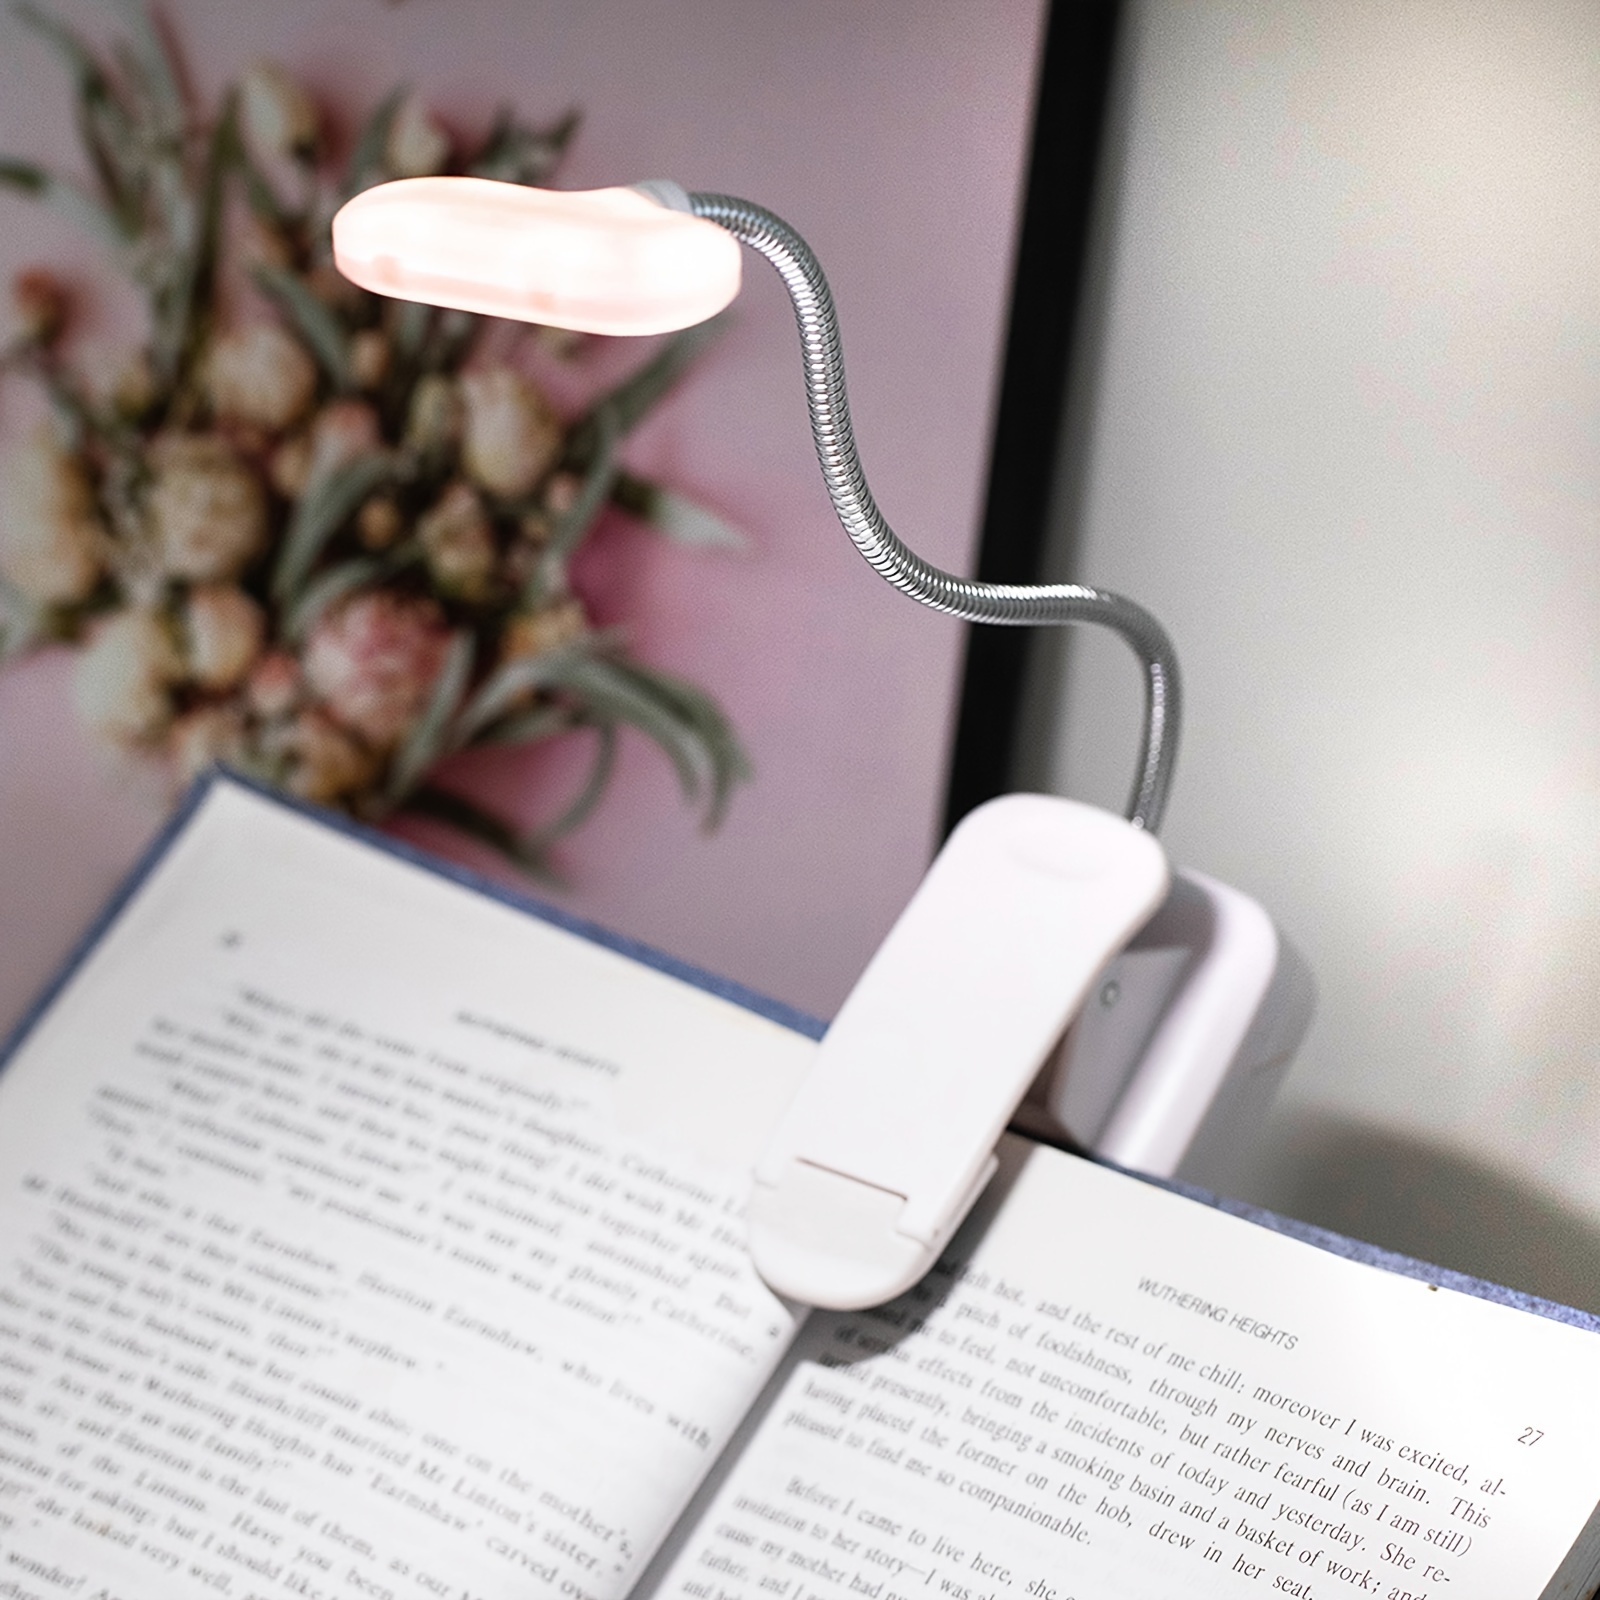 

1pc Clip-on Led Reading Light With Adjustable Arm, Battery Powered, Portable Desk Lamp, Eye-care White Light For Night Reading